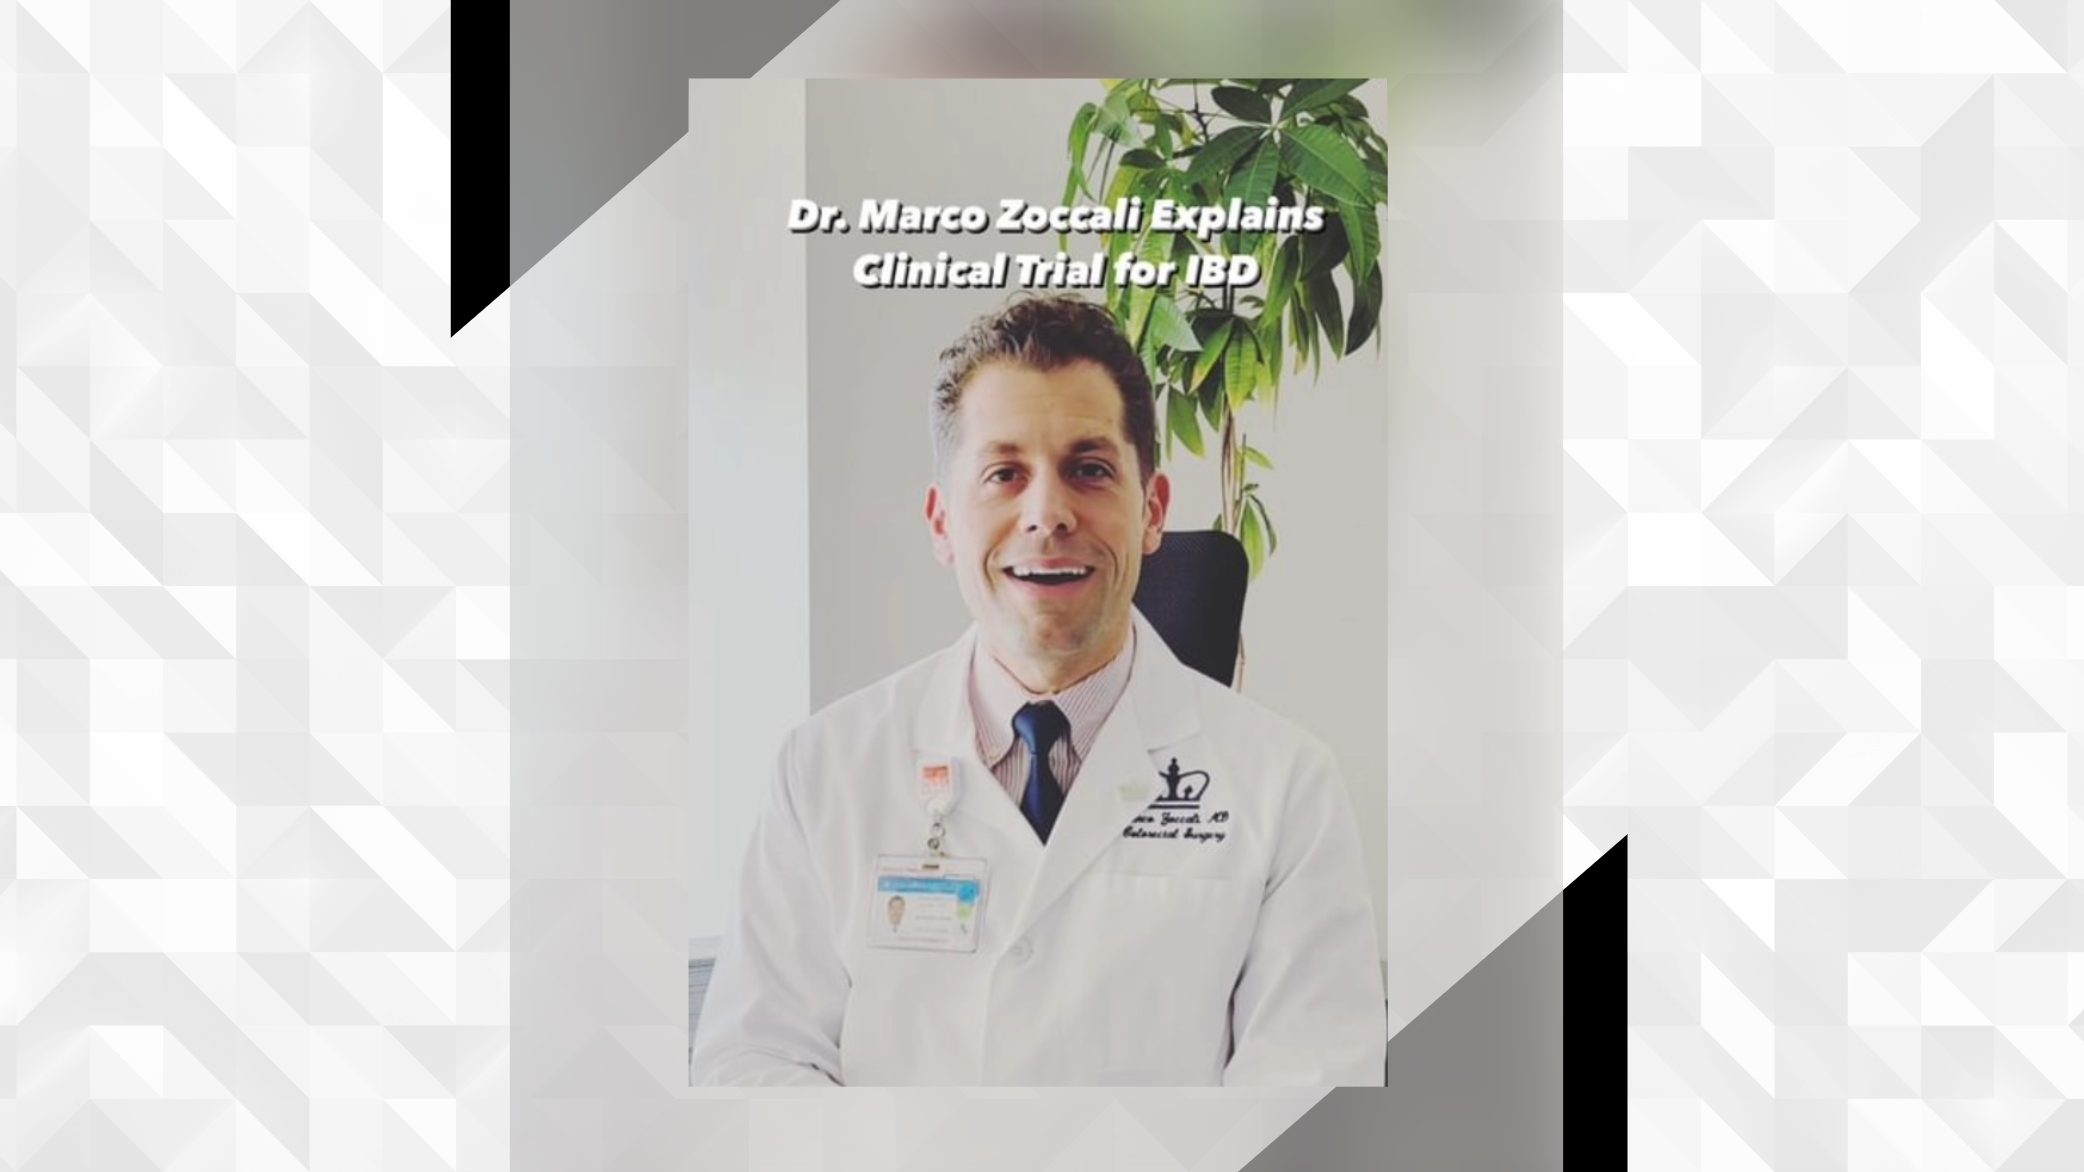 Dr. Marco Zoccali Explains Groundbreaking Clinical Trial for IBD [Video]